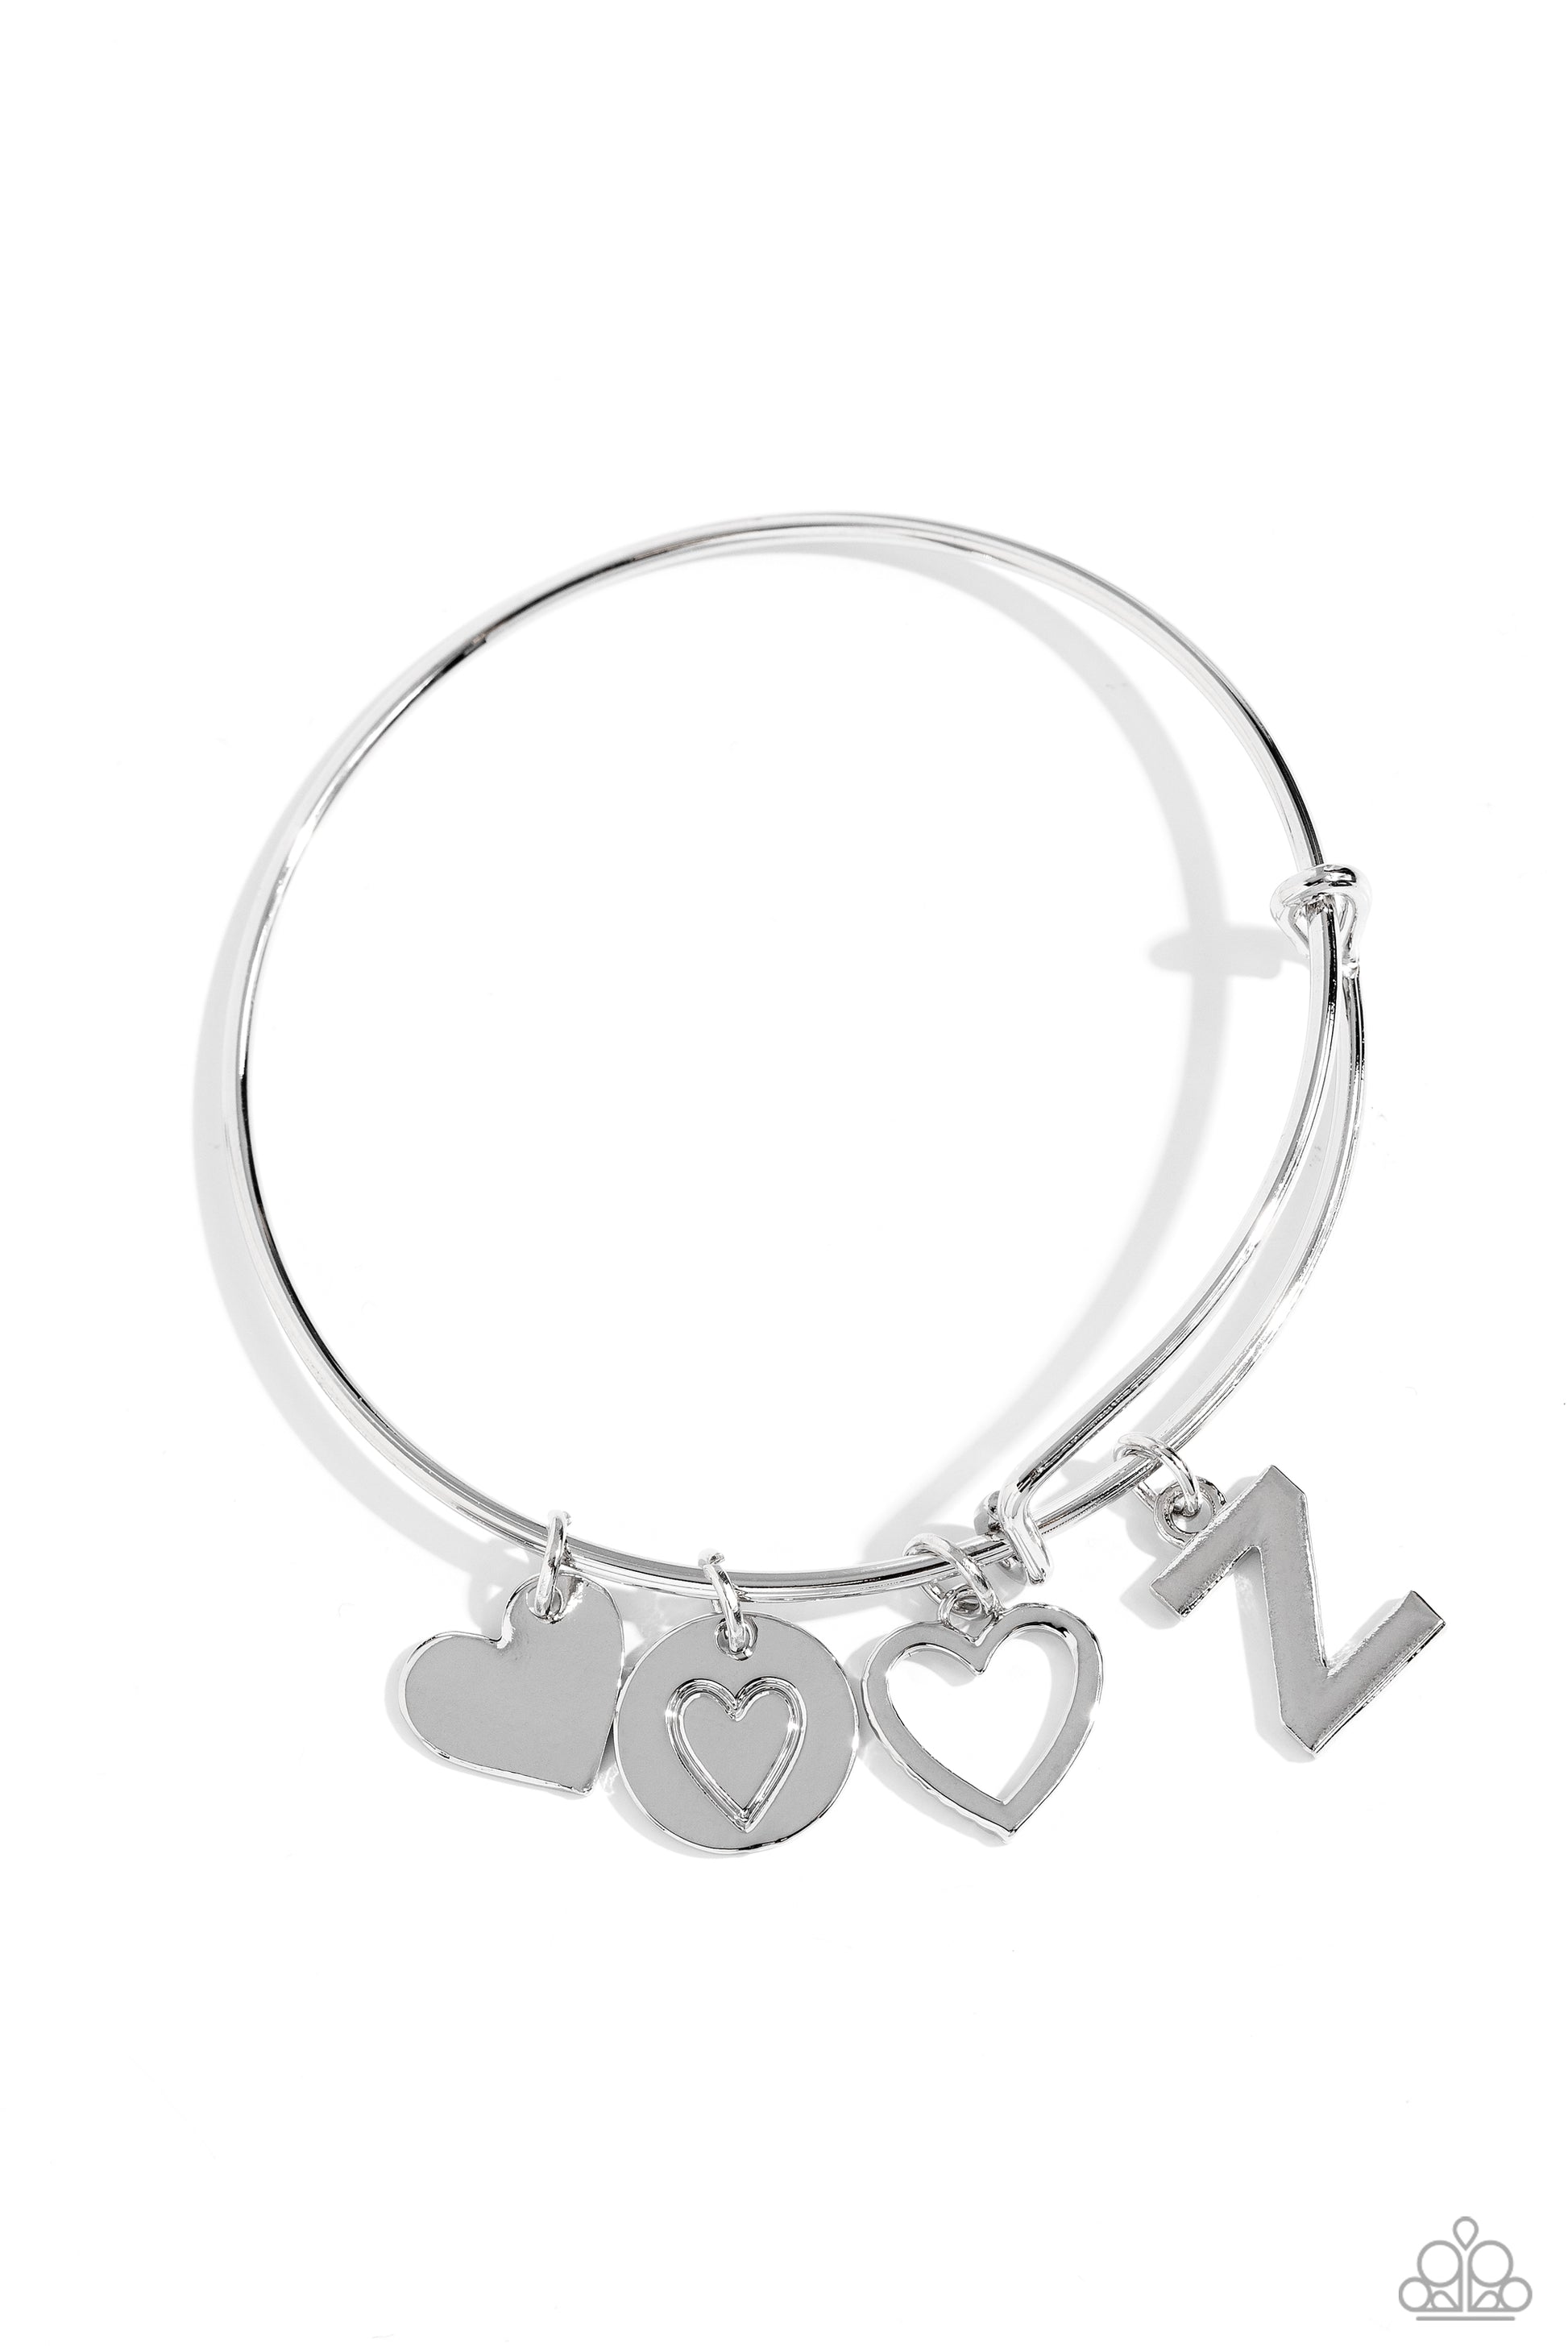 Making It INITIAL Silver "Z" Bangle Bracelet - Paparazzi Accessories  Featuring shiny silver, airy, and stamped finishes, a mismatched collection of dainty heart charms, and the letter "Z" glides along a silver bar fitting at the center of the wrist for a romantic, sentimental flair.  Sold as one individual bracelet.  SKU: P9BA-SVXX-210XX